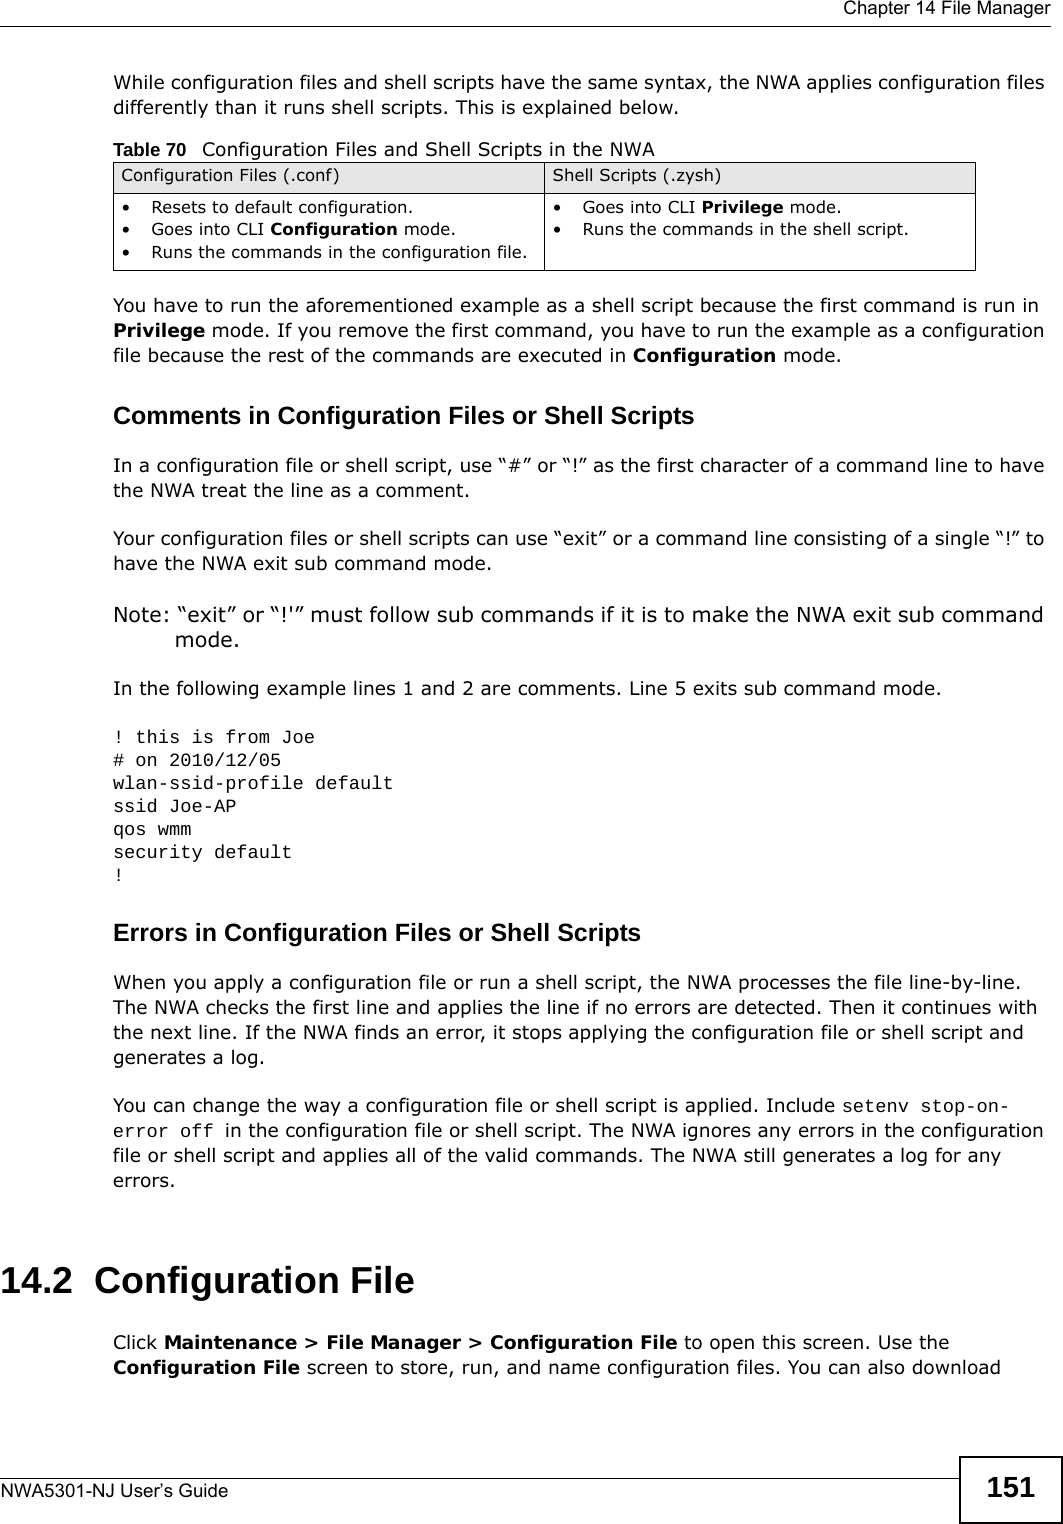  Chapter 14 File ManagerNWA5301-NJ User’s Guide 151While configuration files and shell scripts have the same syntax, the NWA applies configuration files differently than it runs shell scripts. This is explained below.You have to run the aforementioned example as a shell script because the first command is run in Privilege mode. If you remove the first command, you have to run the example as a configuration file because the rest of the commands are executed in Configuration mode.Comments in Configuration Files or Shell ScriptsIn a configuration file or shell script, use “#” or “!” as the first character of a command line to have the NWA treat the line as a comment. Your configuration files or shell scripts can use “exit” or a command line consisting of a single “!” to have the NWA exit sub command mode.Note: “exit” or “!&apos;” must follow sub commands if it is to make the NWA exit sub command mode.In the following example lines 1 and 2 are comments. Line 5 exits sub command mode. ! this is from Joe# on 2010/12/05wlan-ssid-profile defaultssid Joe-APqos wmmsecurity default!Errors in Configuration Files or Shell ScriptsWhen you apply a configuration file or run a shell script, the NWA processes the file line-by-line. The NWA checks the first line and applies the line if no errors are detected. Then it continues with the next line. If the NWA finds an error, it stops applying the configuration file or shell script and generates a log. You can change the way a configuration file or shell script is applied. Include setenv stop-on-error off in the configuration file or shell script. The NWA ignores any errors in the configuration file or shell script and applies all of the valid commands. The NWA still generates a log for any errors. 14.2  Configuration FileClick Maintenance &gt; File Manager &gt; Configuration File to open this screen. Use the Configuration File screen to store, run, and name configuration files. You can also download Table 70   Configuration Files and Shell Scripts in the NWAConfiguration Files (.conf) Shell Scripts (.zysh)• Resets to default configuration.•Goes into CLI Configuration mode.• Runs the commands in the configuration file.•Goes into CLI Privilege mode.• Runs the commands in the shell script.